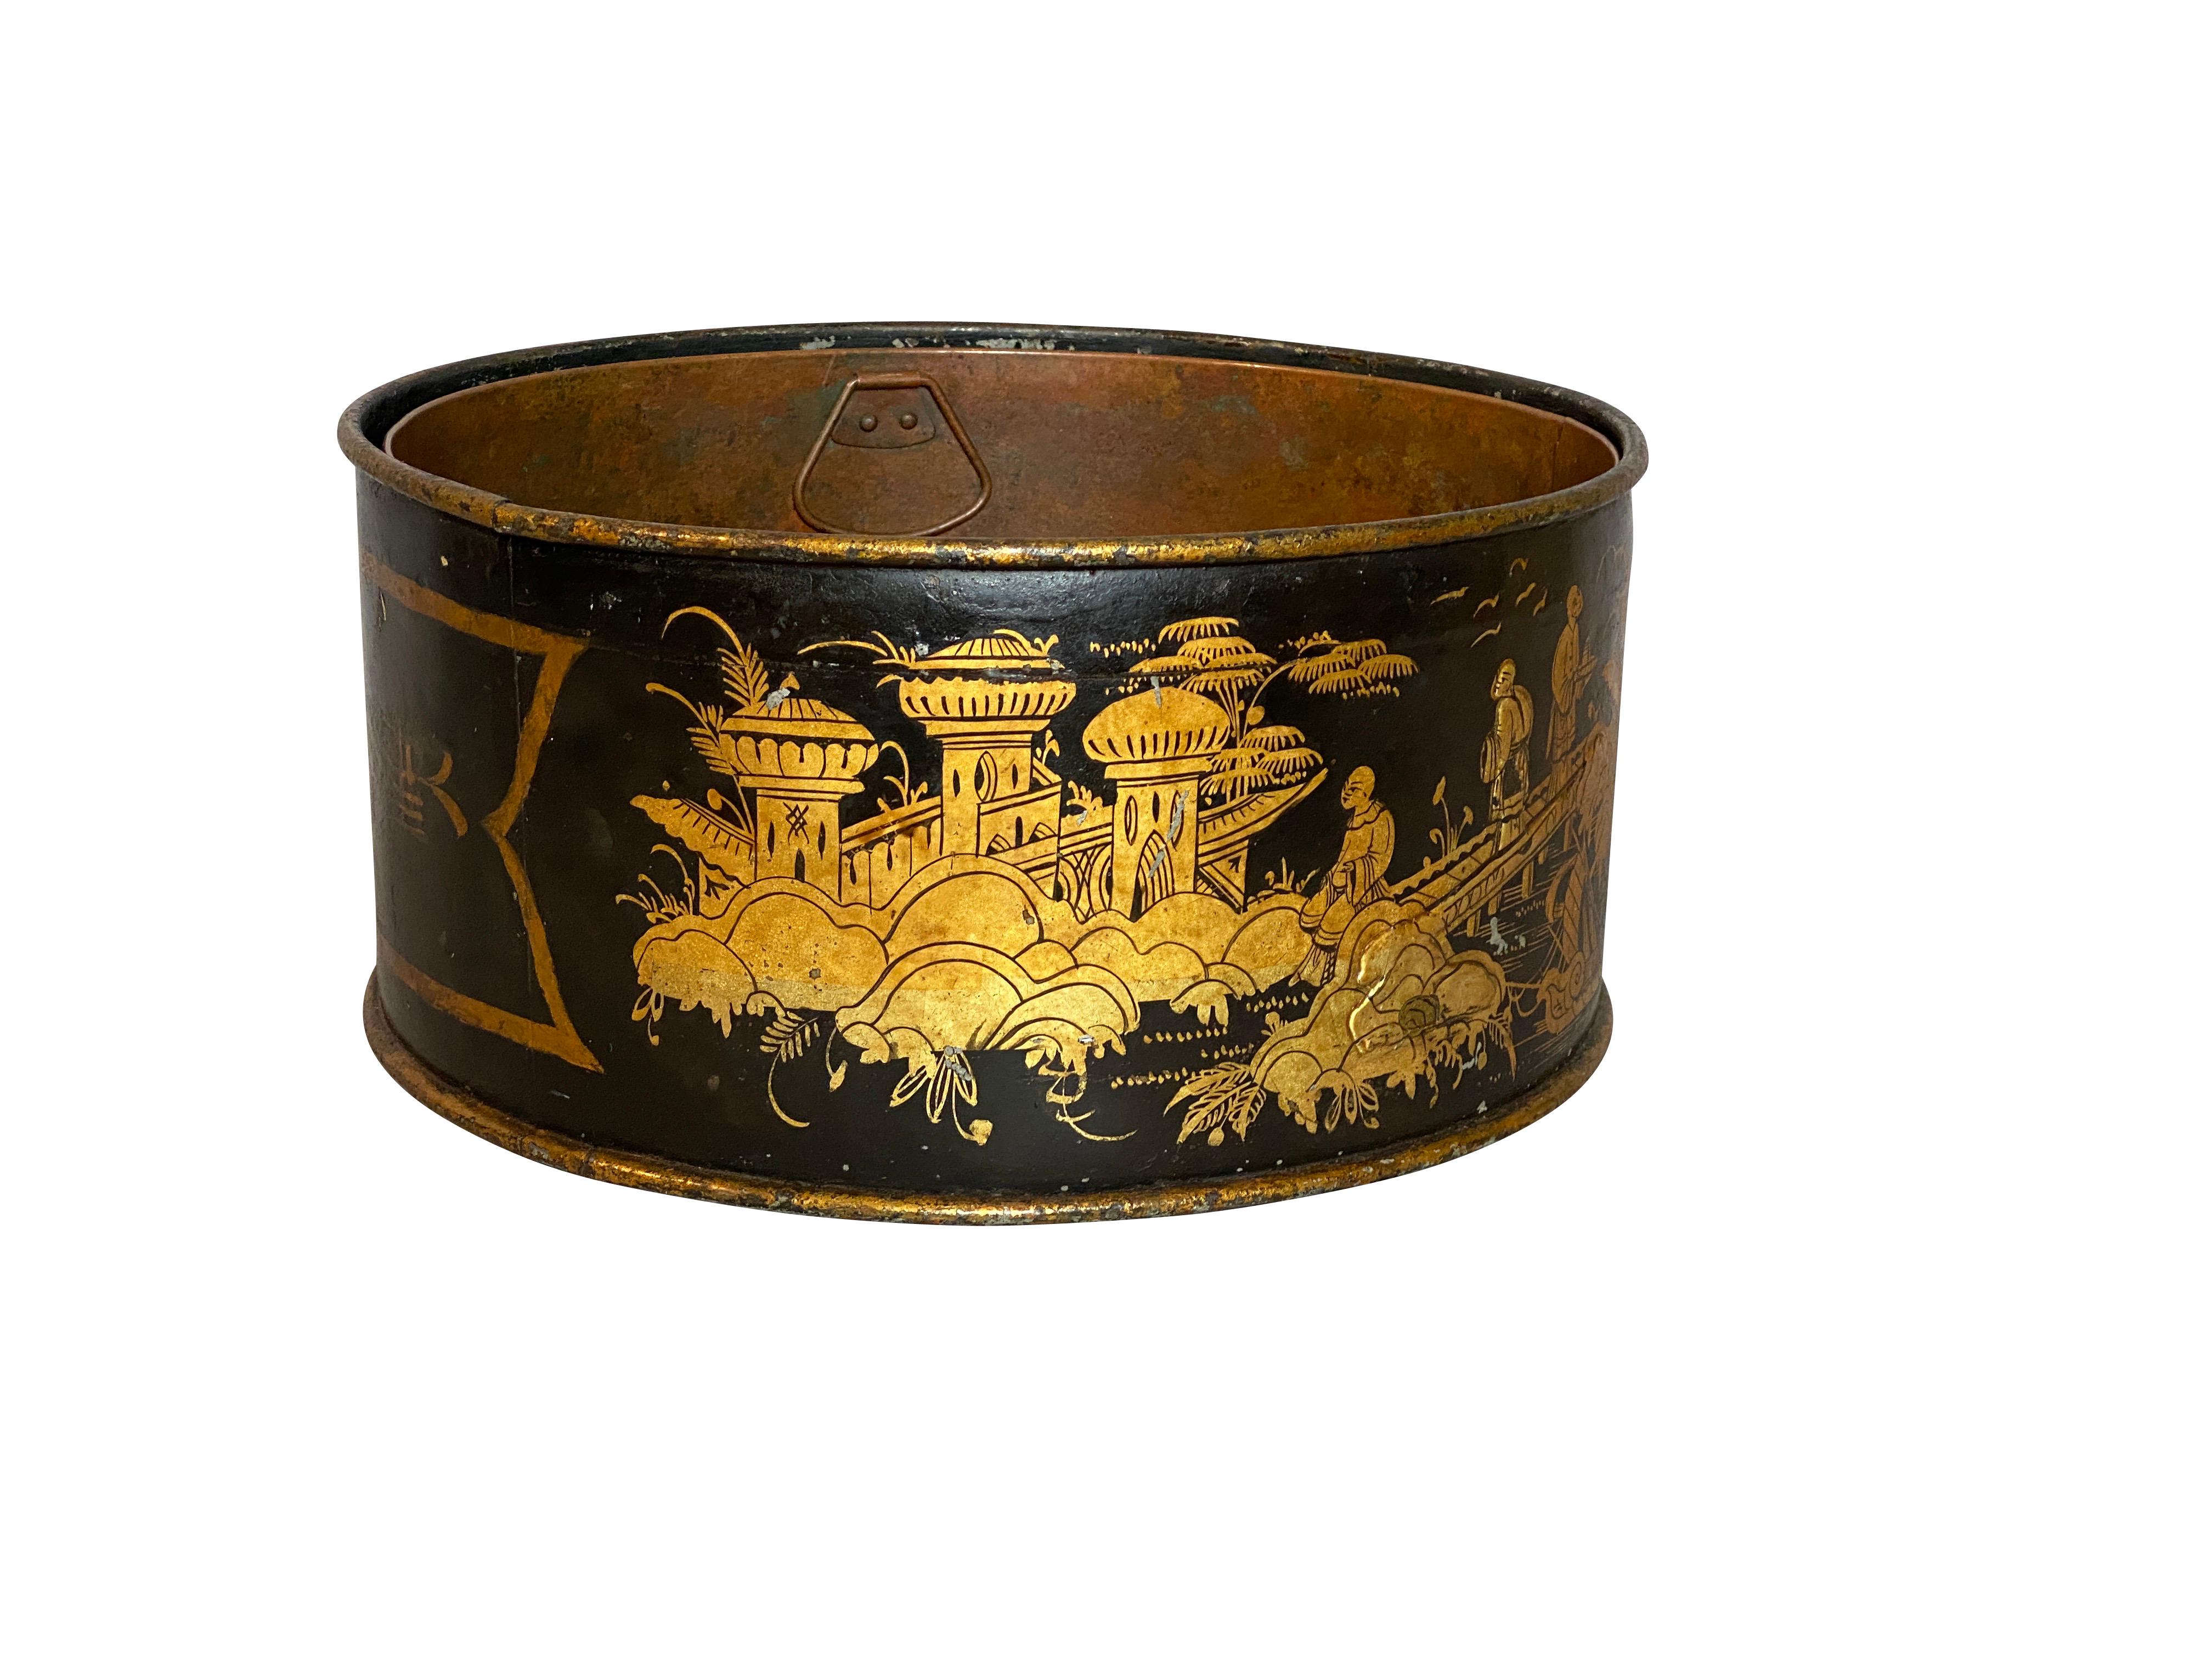 Circular with copper liner. Finely and beautifully decorated with Asian inspired gilded pavilions and landscapes in subtle colors and fine patina.